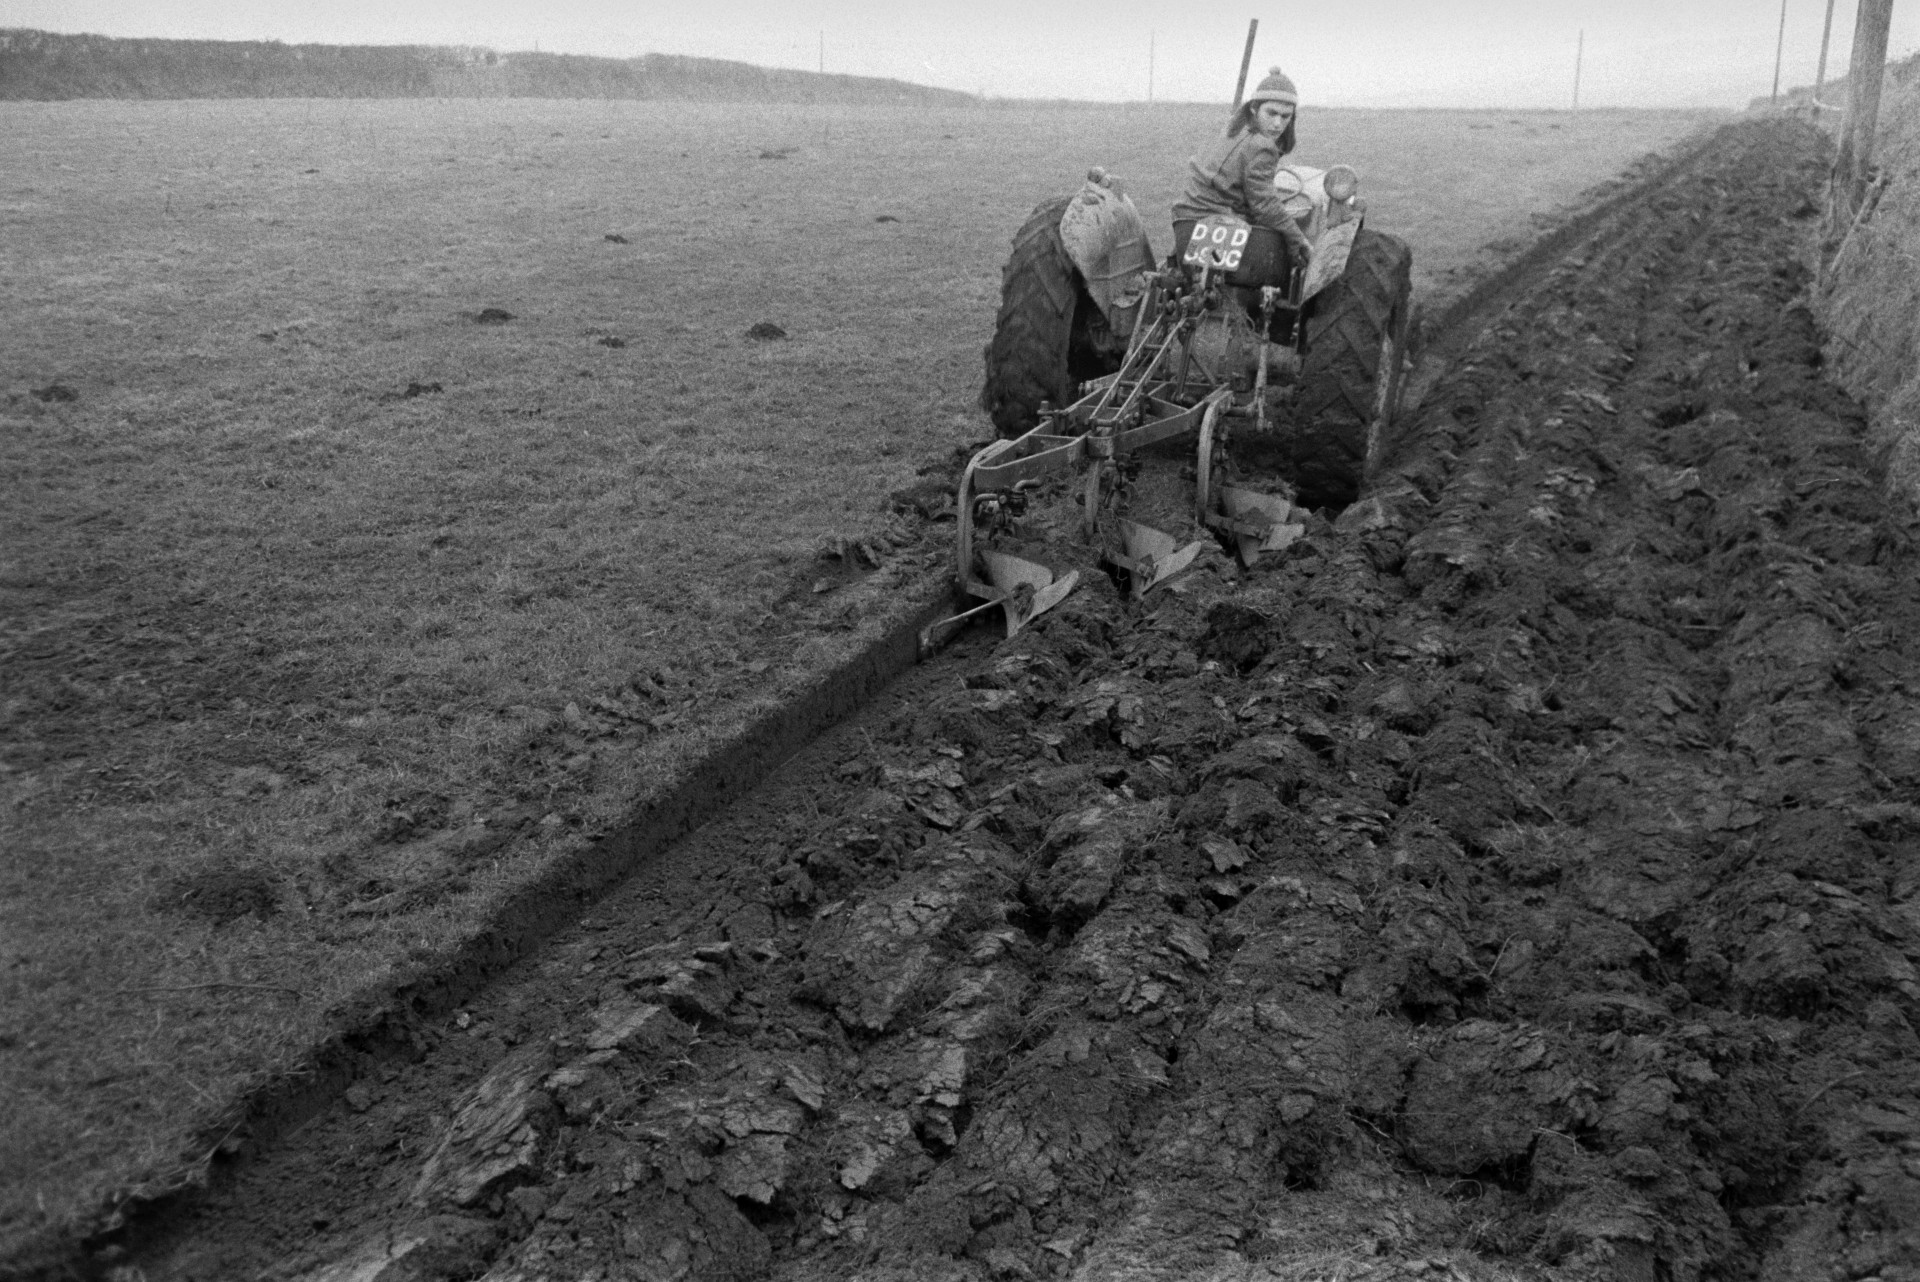 Derek Bright ploughing a grass field for potatoes at Mill Road Farm, Beaford. The fields were ploughed in January to be split by frosts ready for potato planting in March. The farm was also known as Jeffrys.